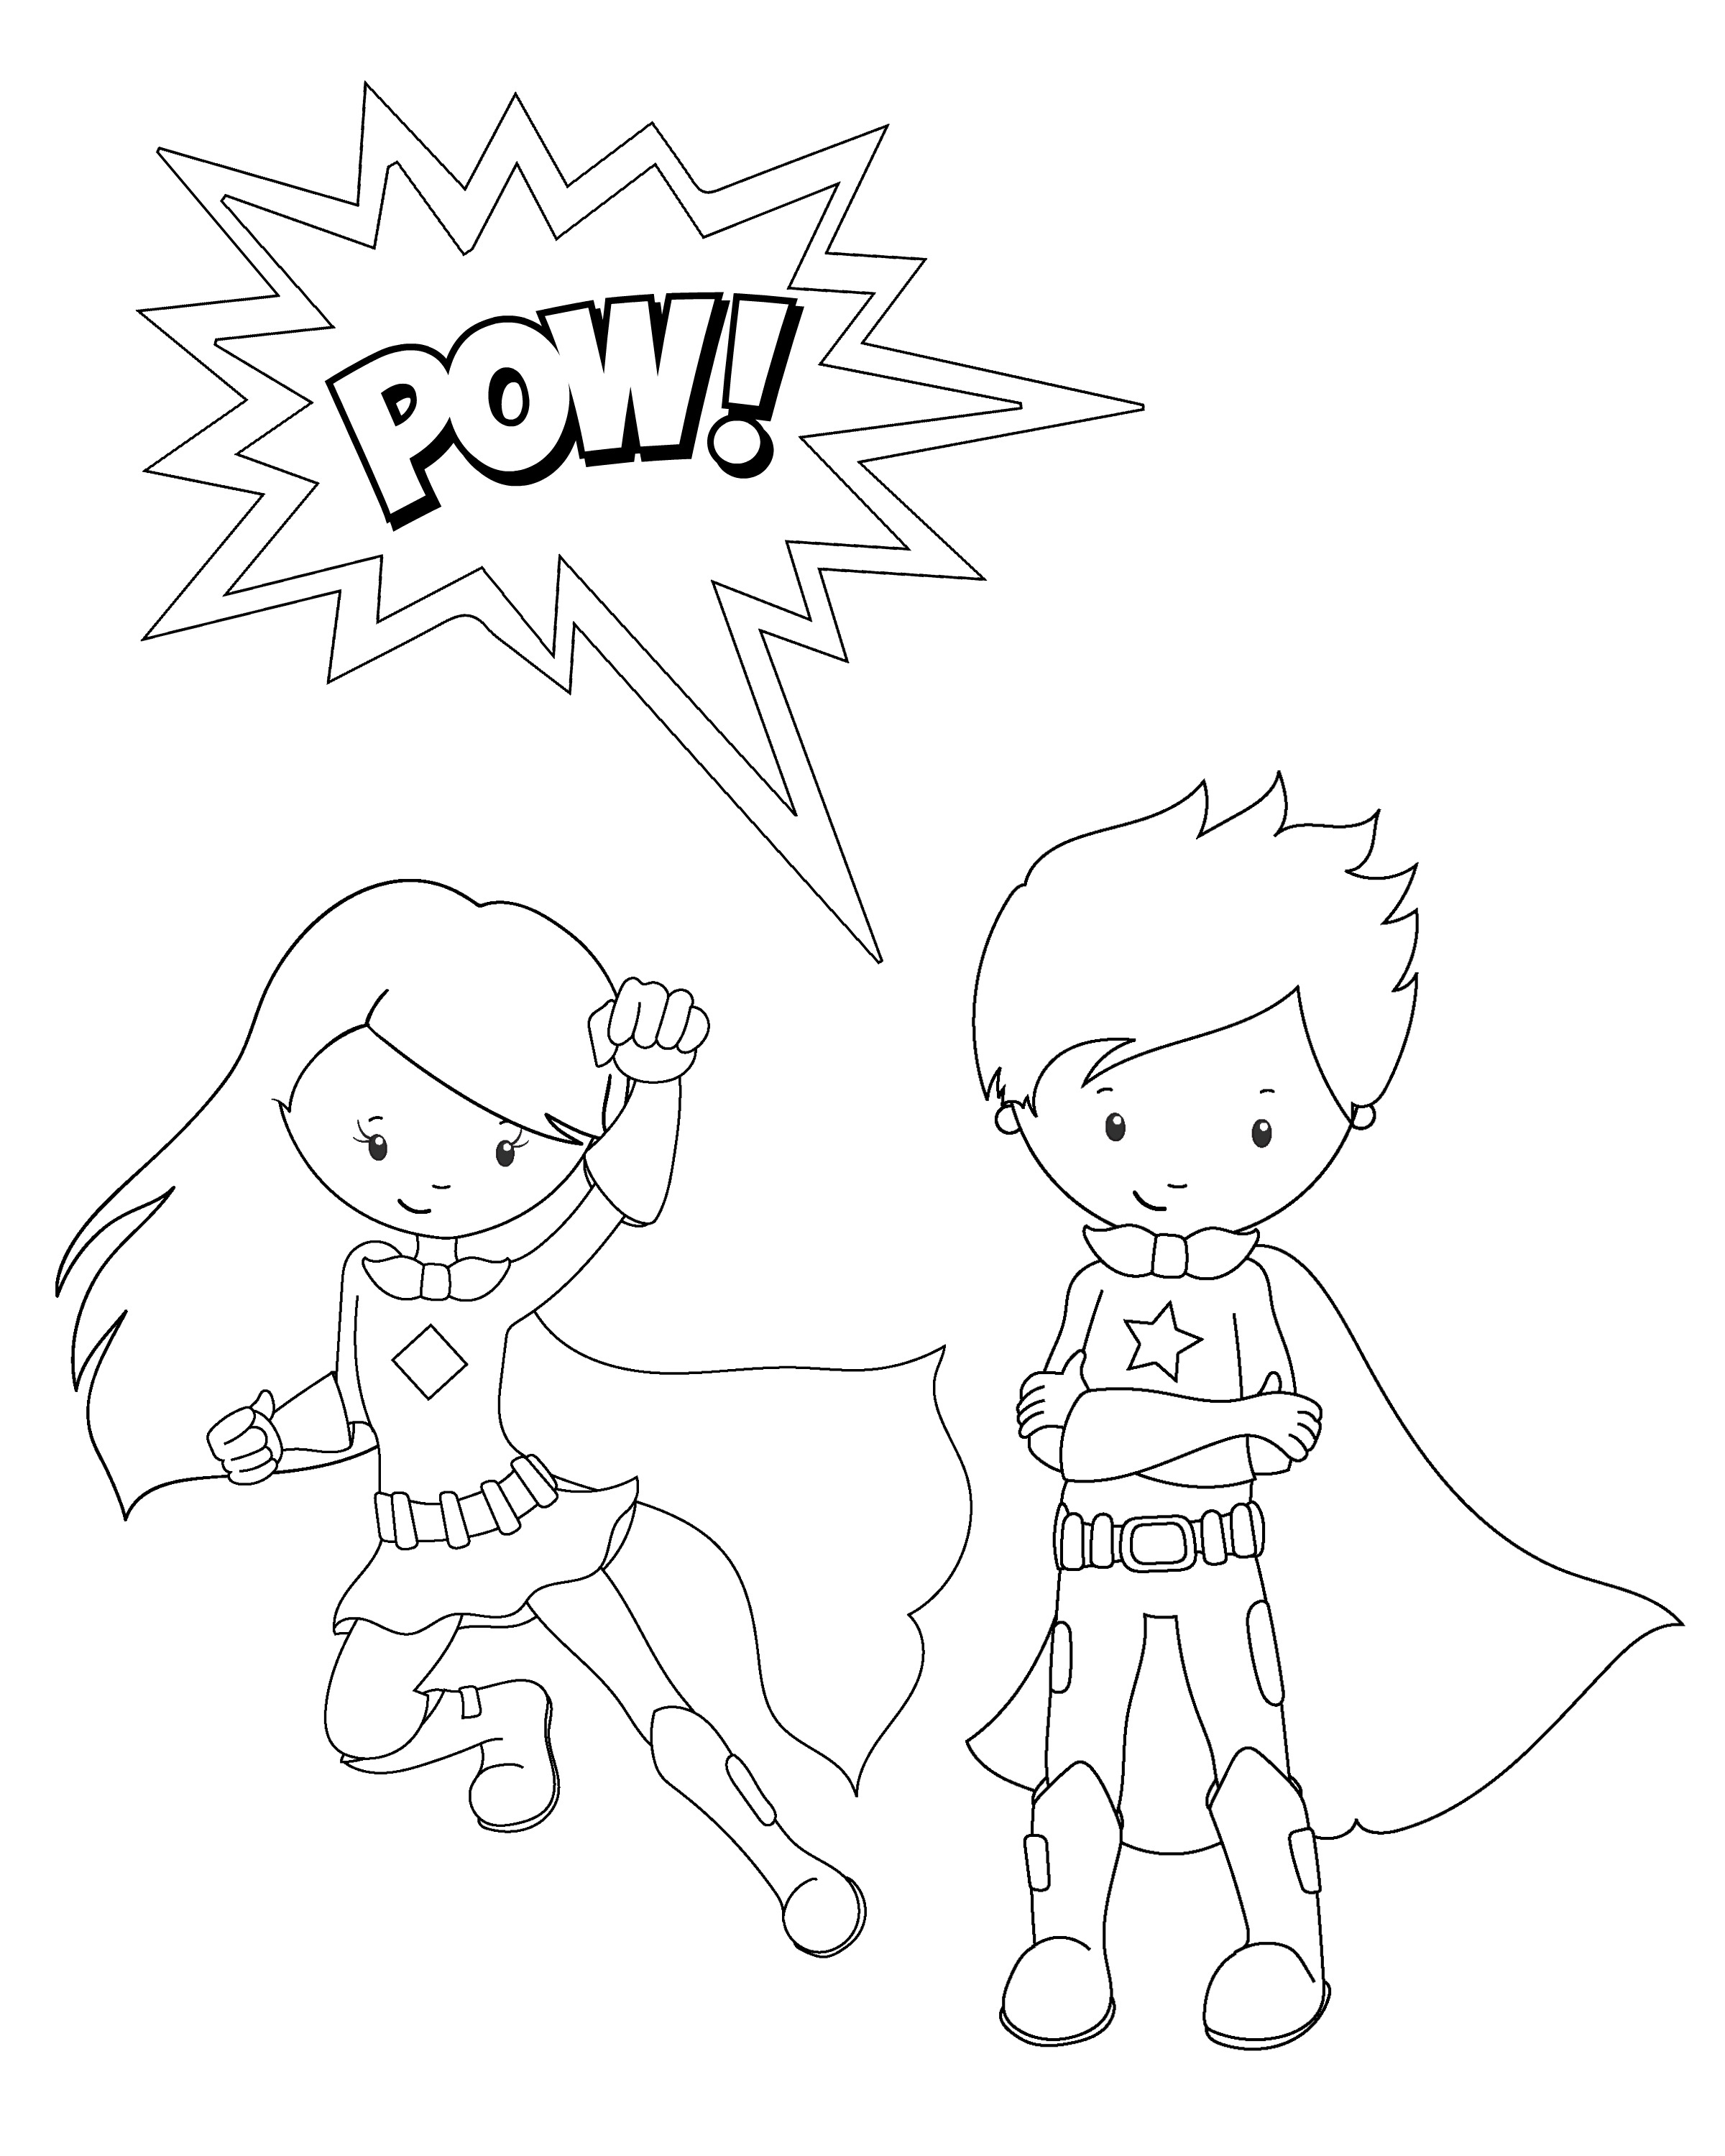 Free Printable Superhero Coloring Sheets For Kids Crazy Little Projects